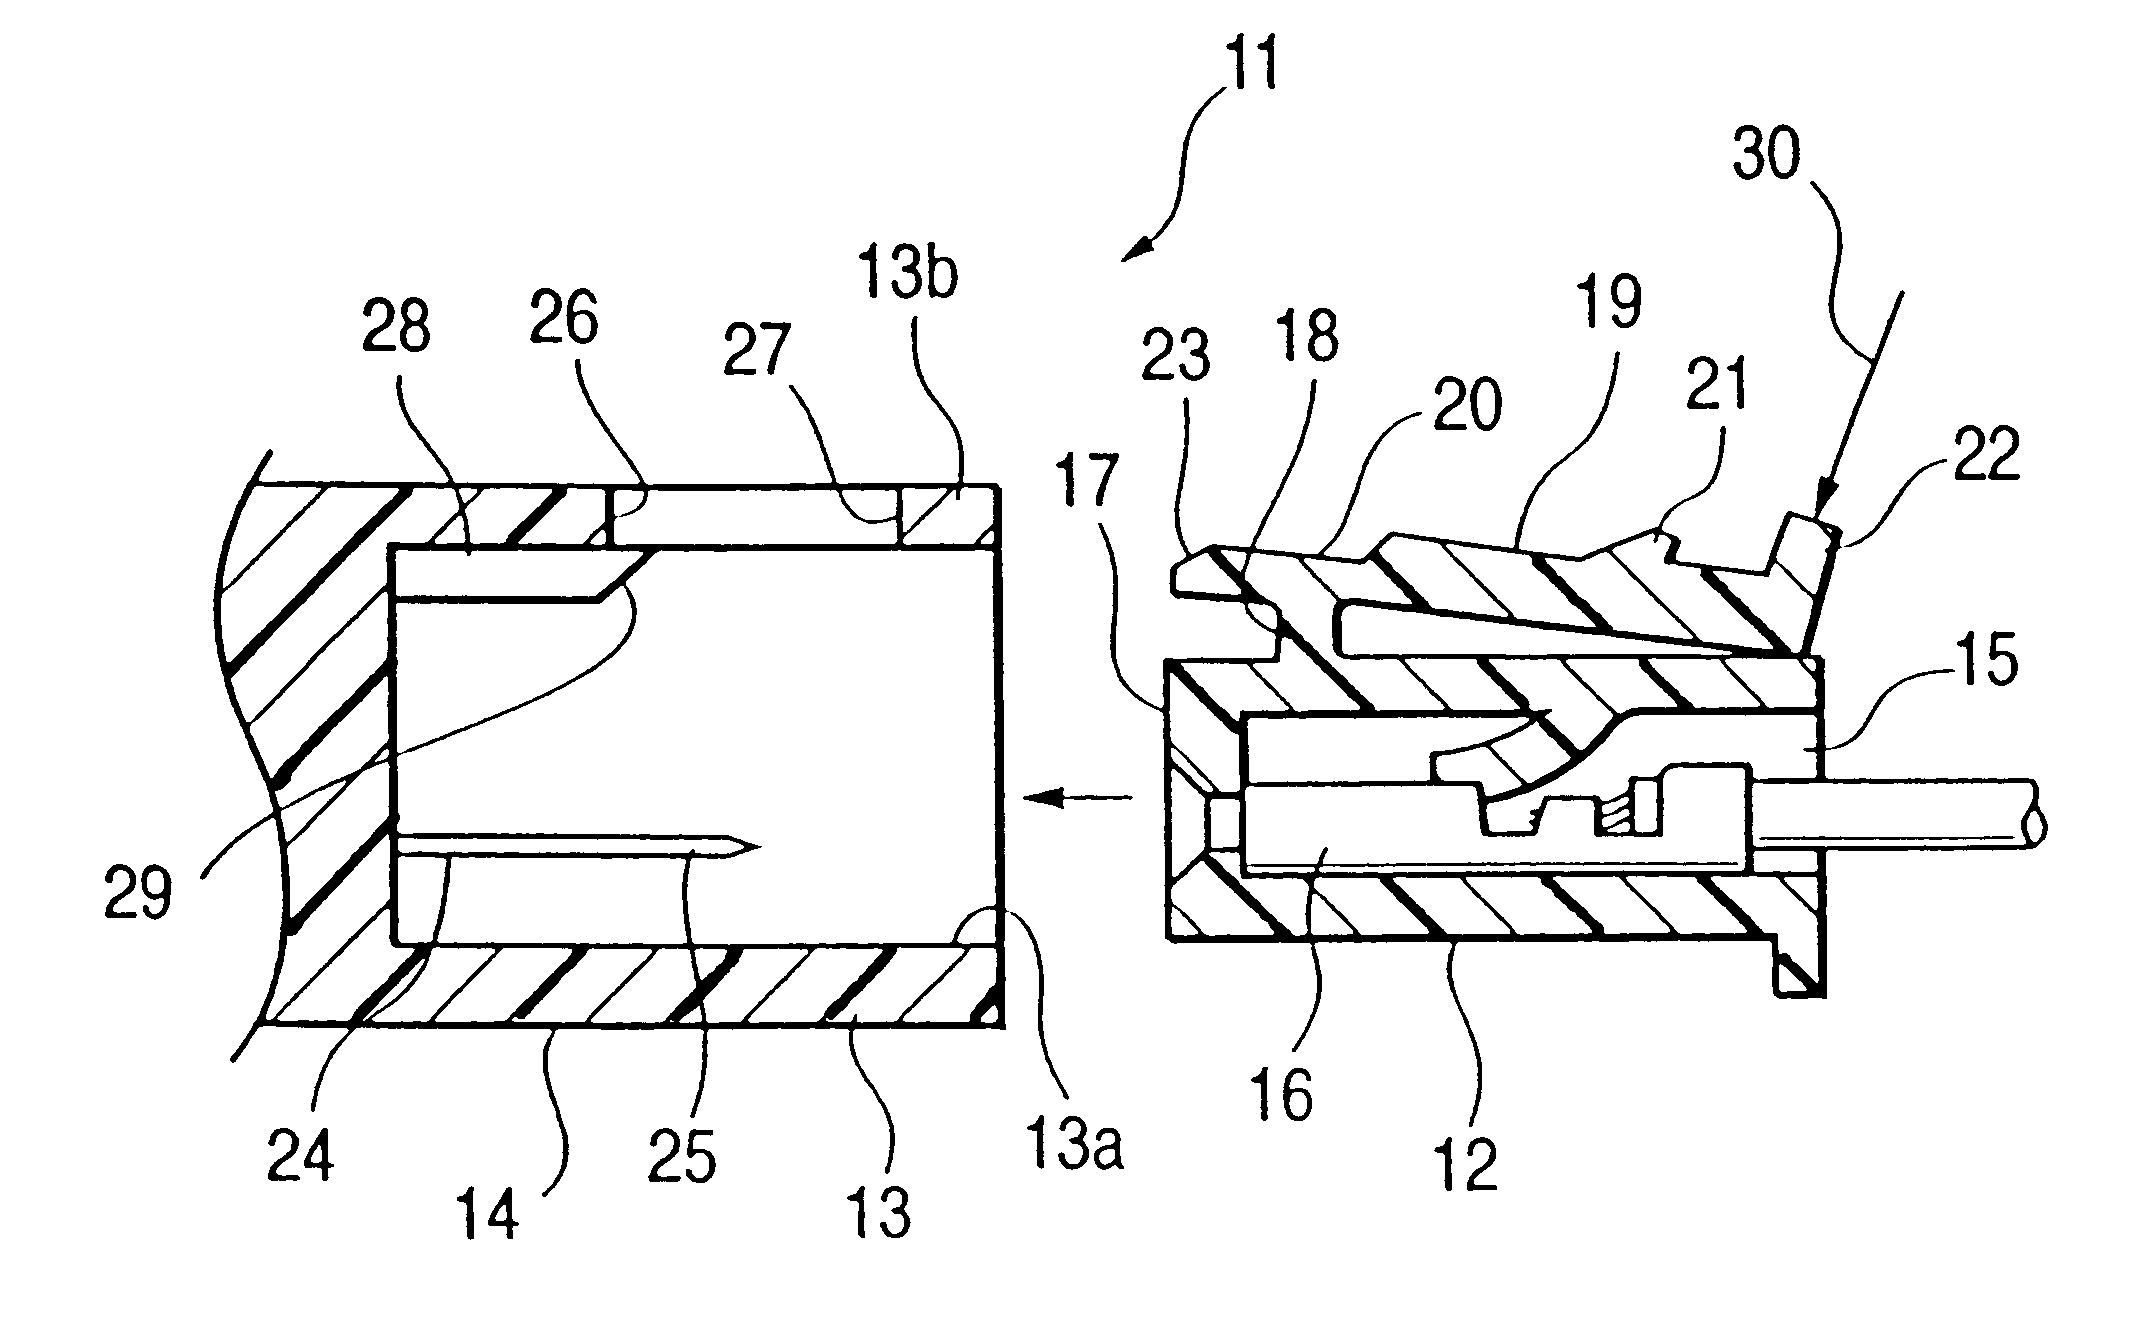 Lock structure for locking male and female connector housings together